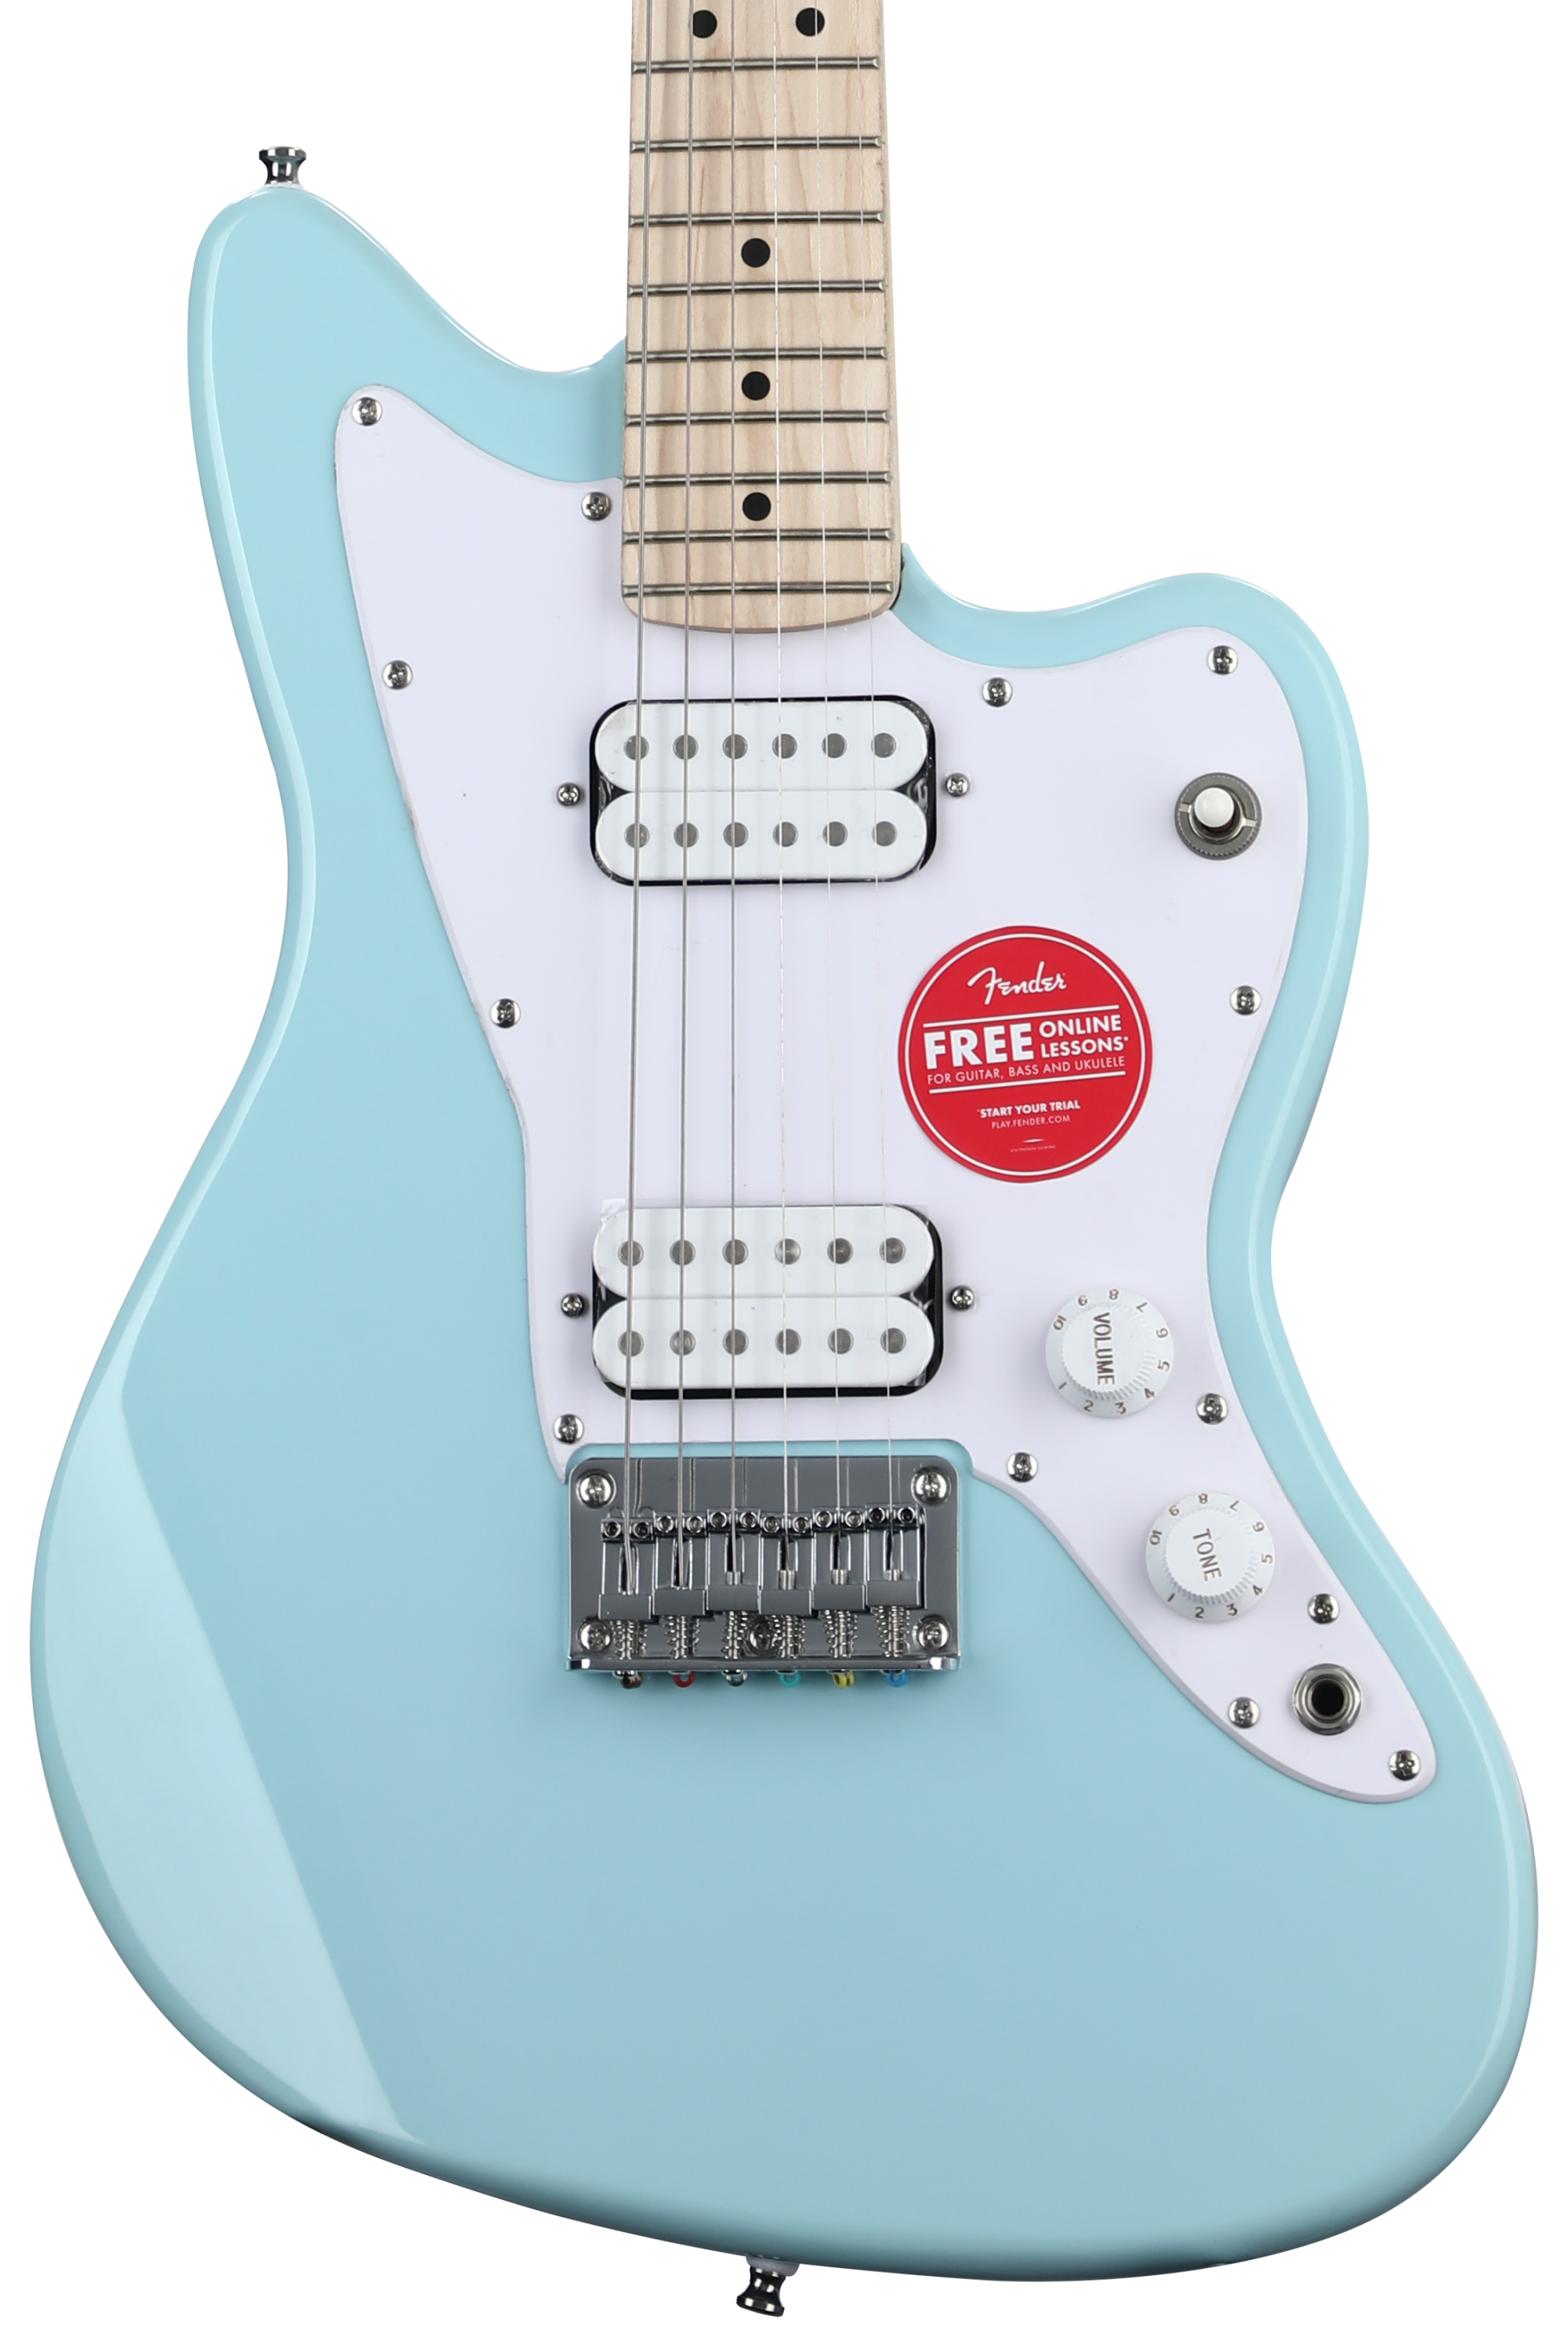 Bundled Item: Squier Mini Jazzmaster HH Electric Guitar - Daphne Blue with Maple Fingerboard